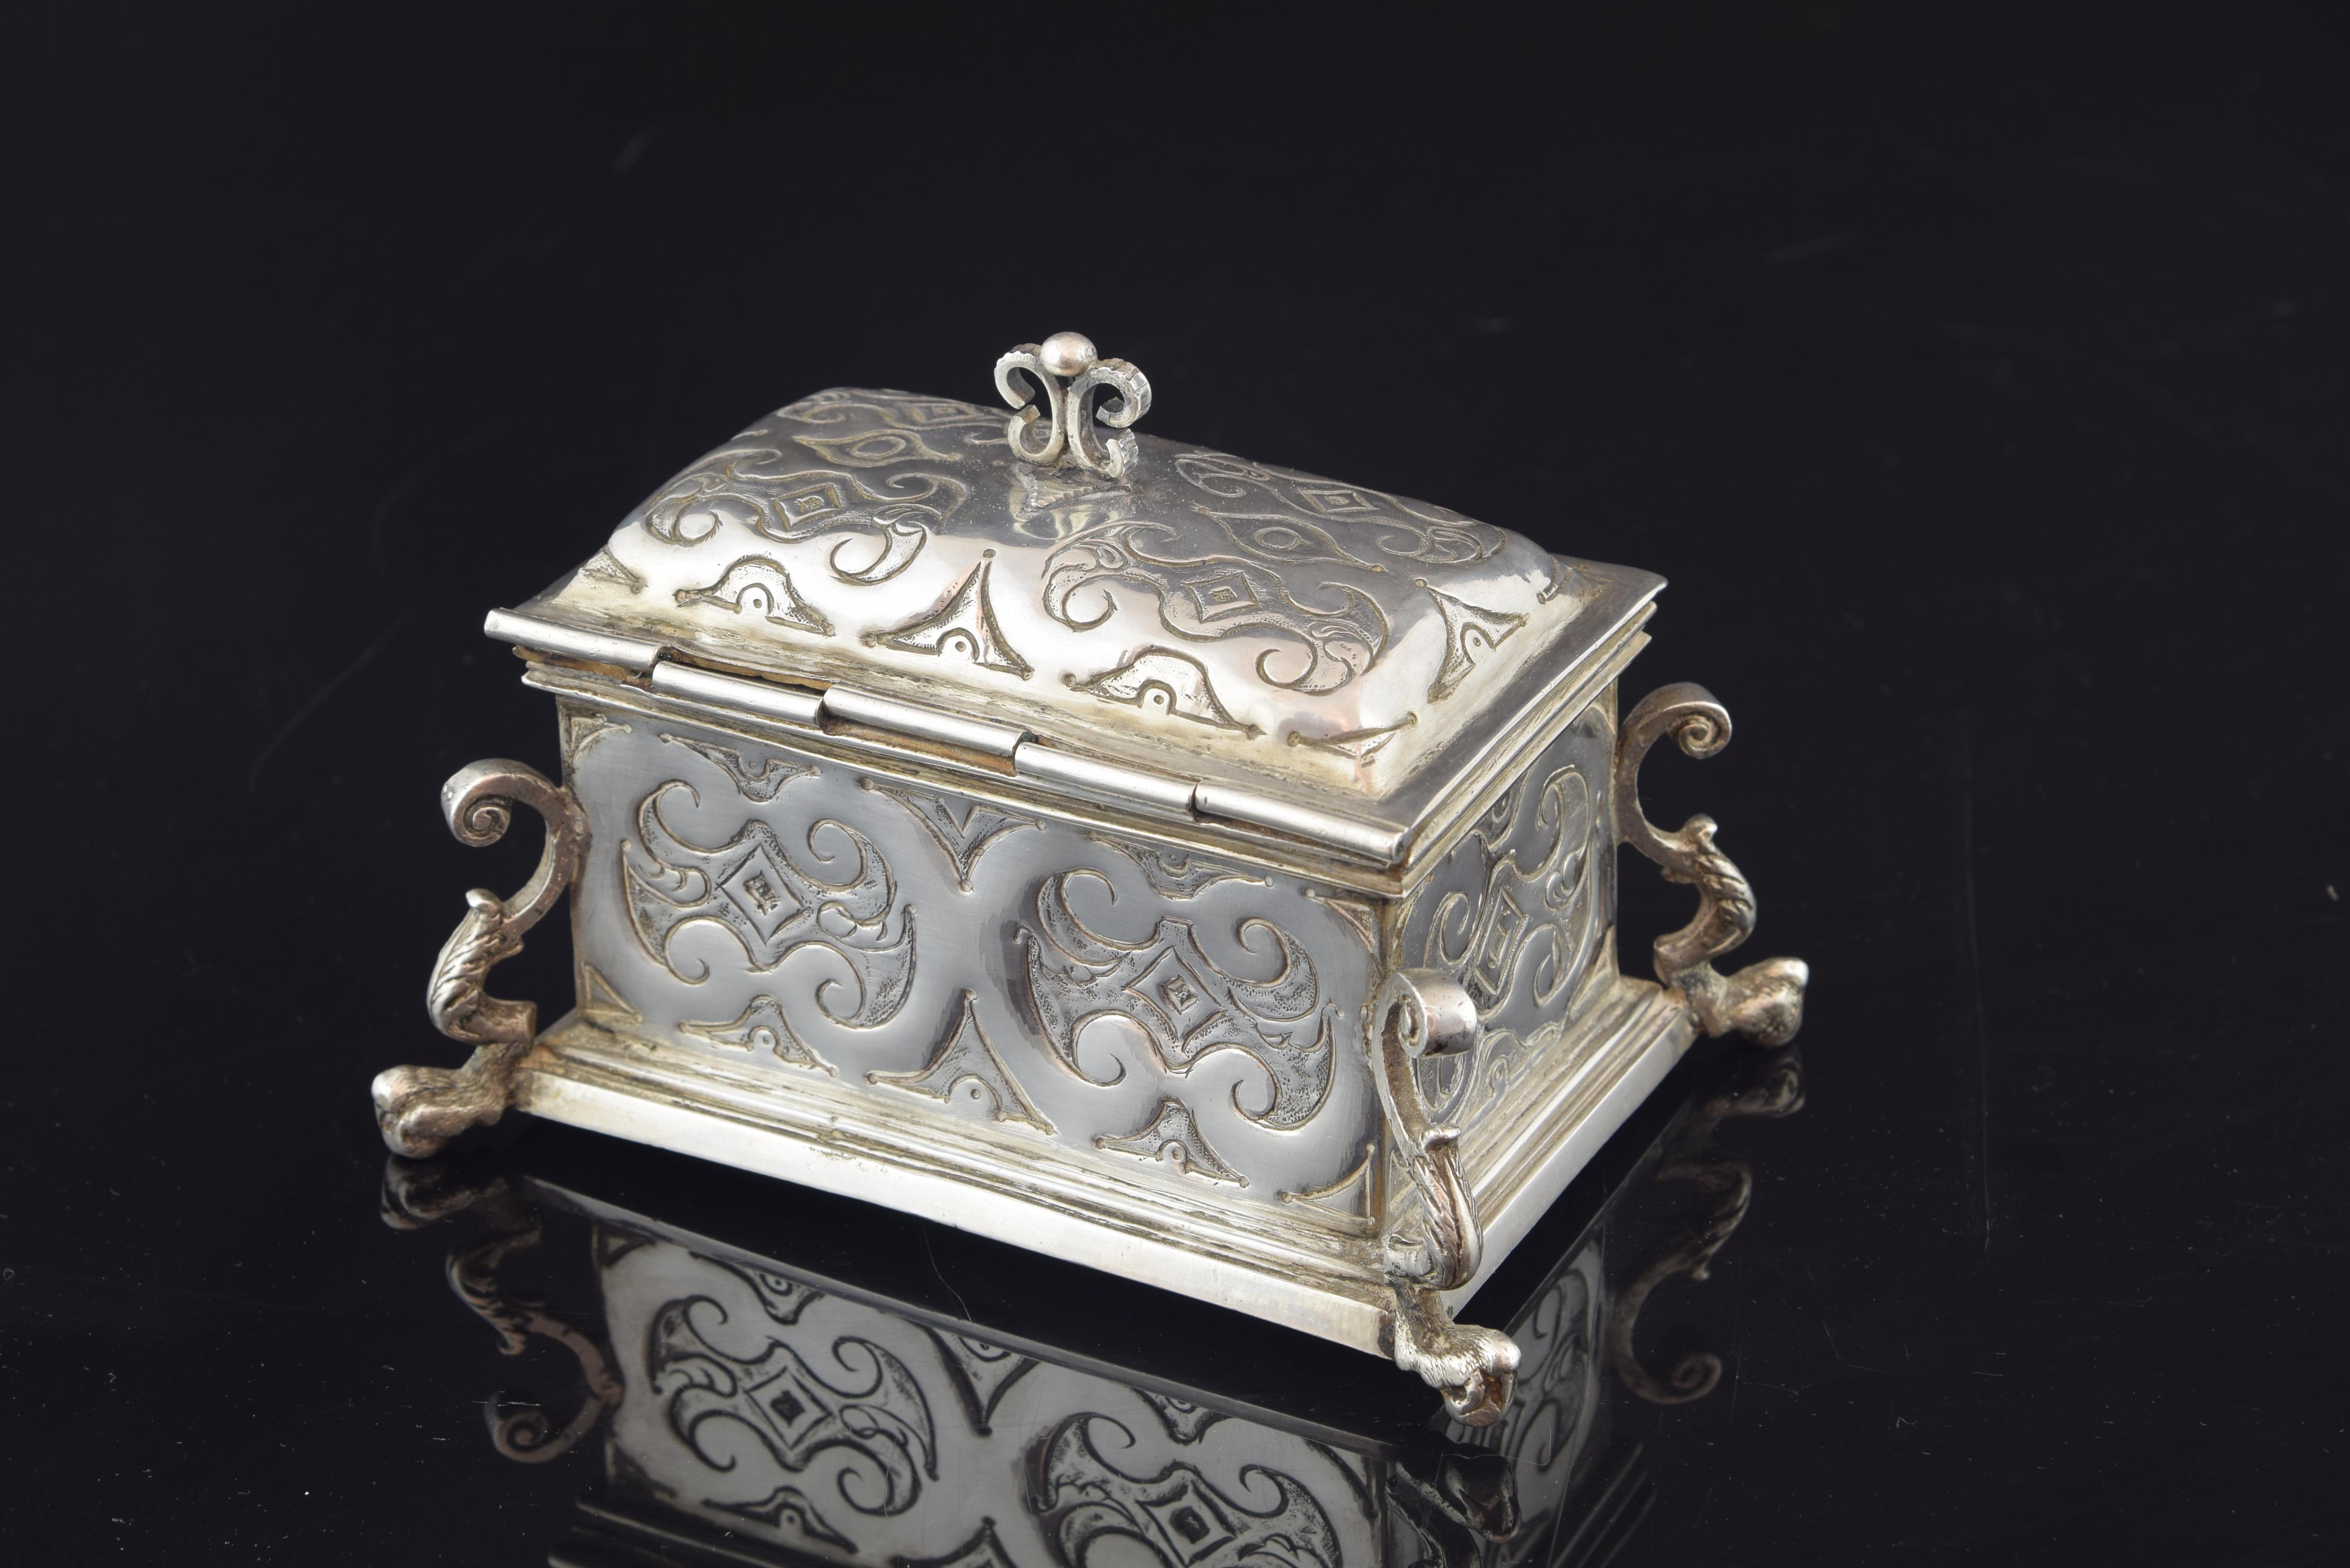 The silver box has elaborate legs, fixed in the corners of the same, which are a combination of volutes in C, plant elements and a lower end reminiscent of a claw. The rectangular body has a decoration embossed in light relief based on ribbons in ce